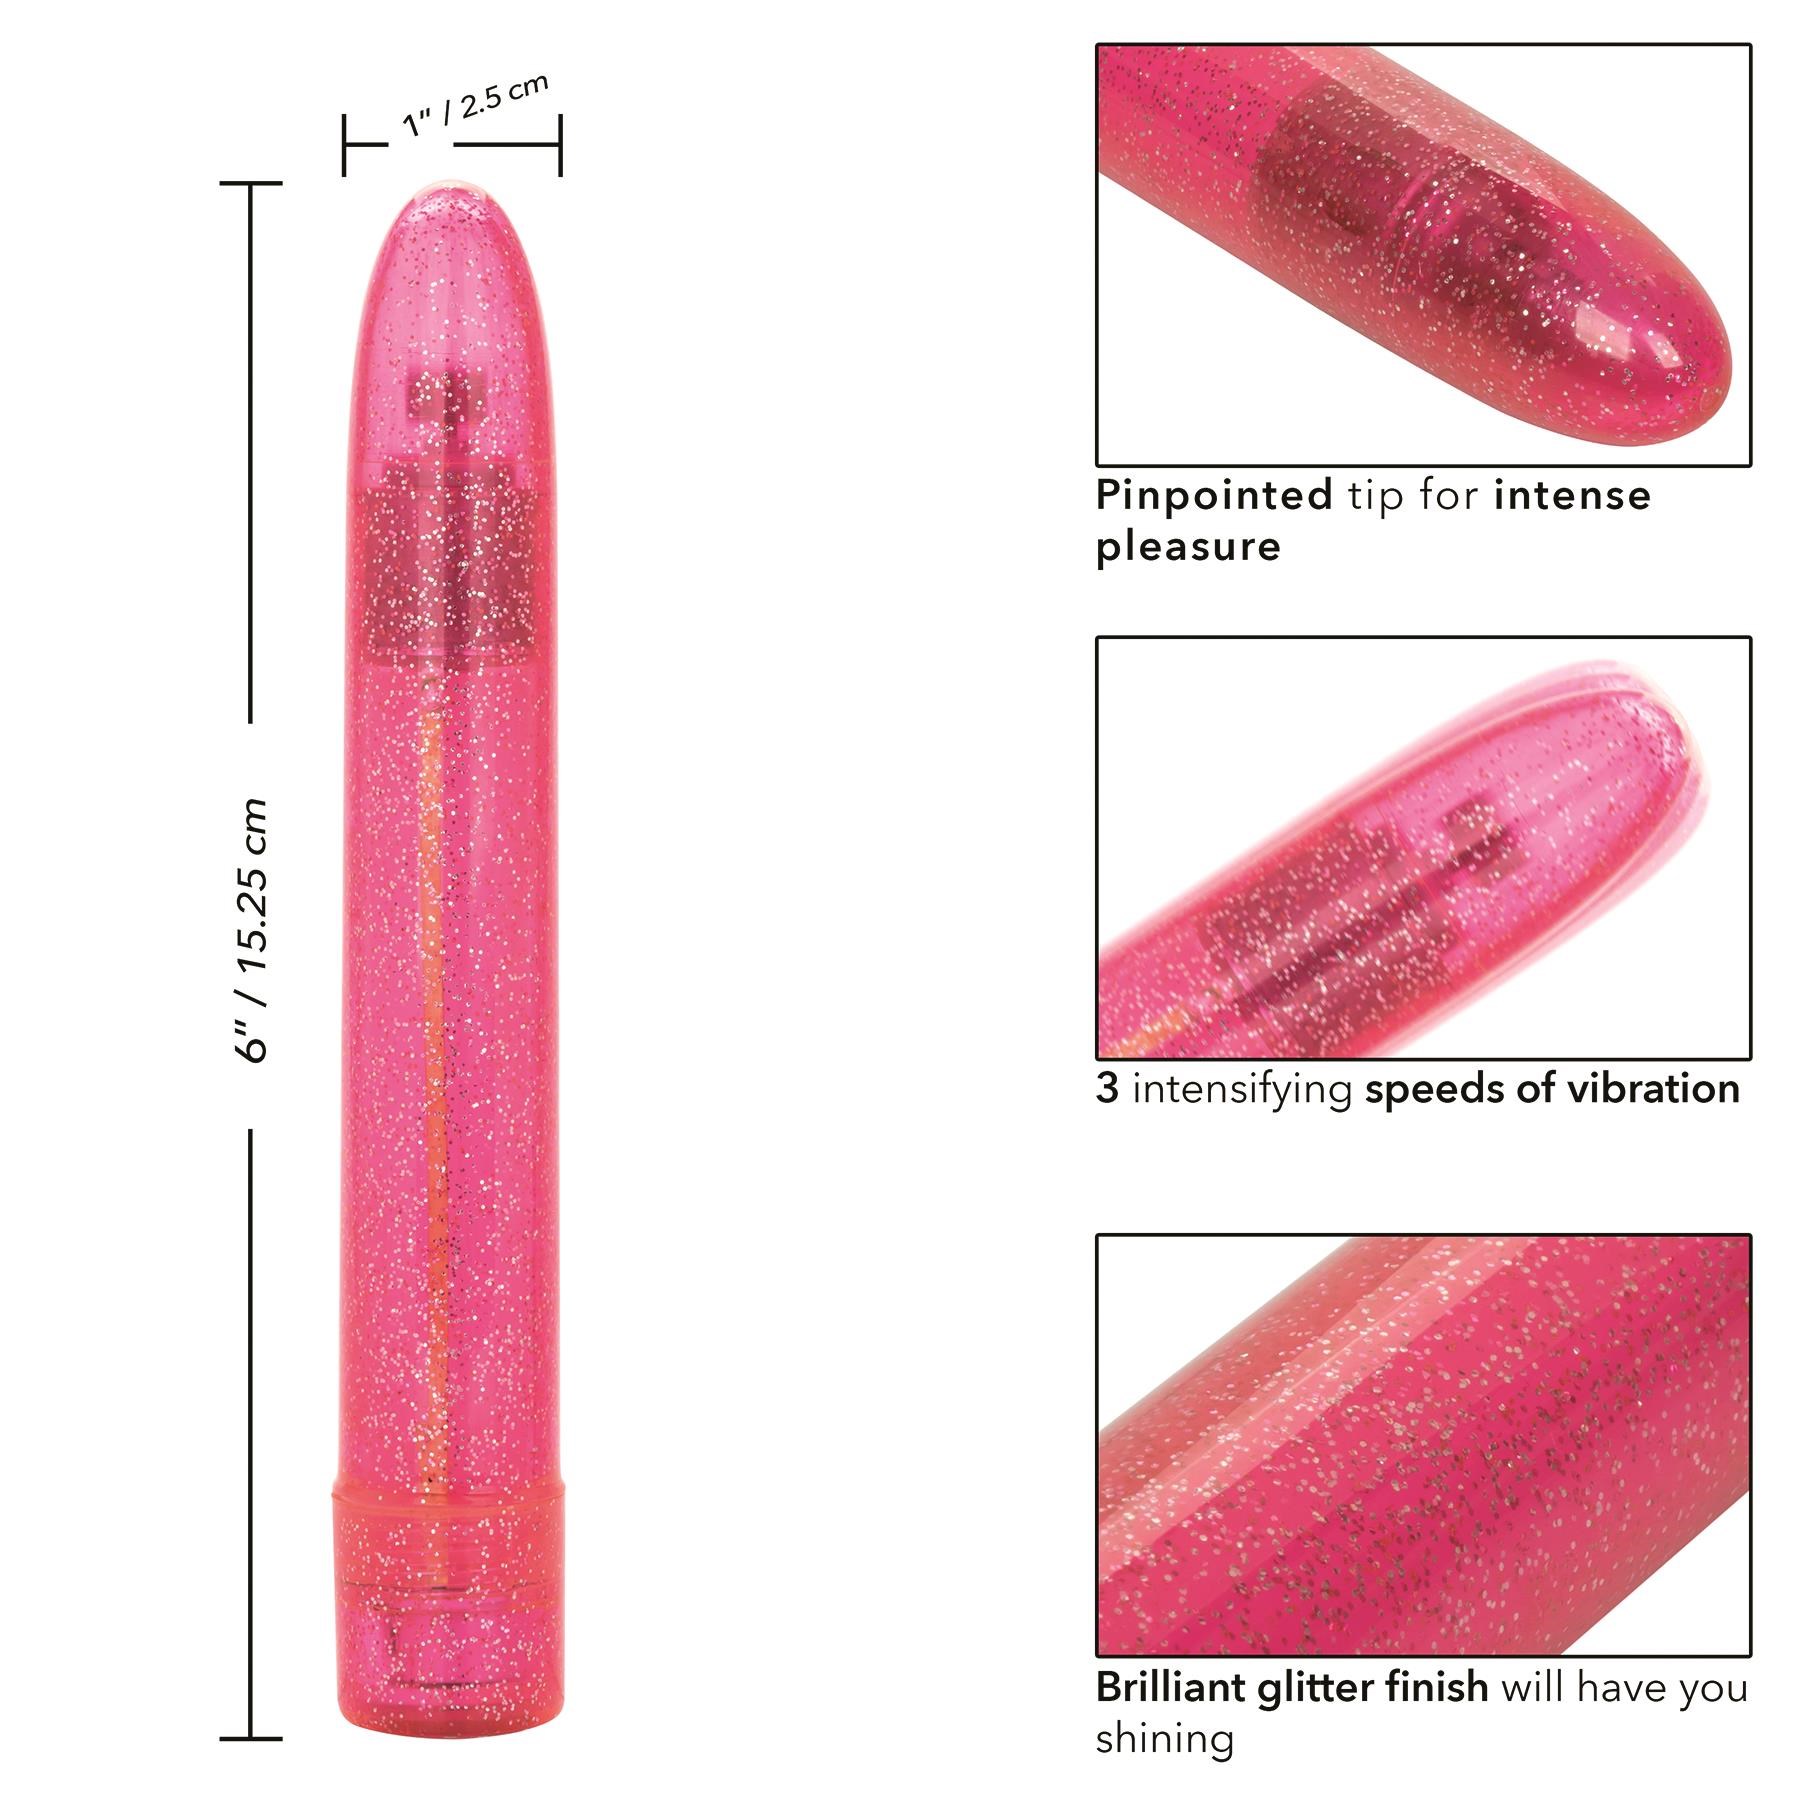 Sparkle Slim Vibrator - Instructions and Dimensions